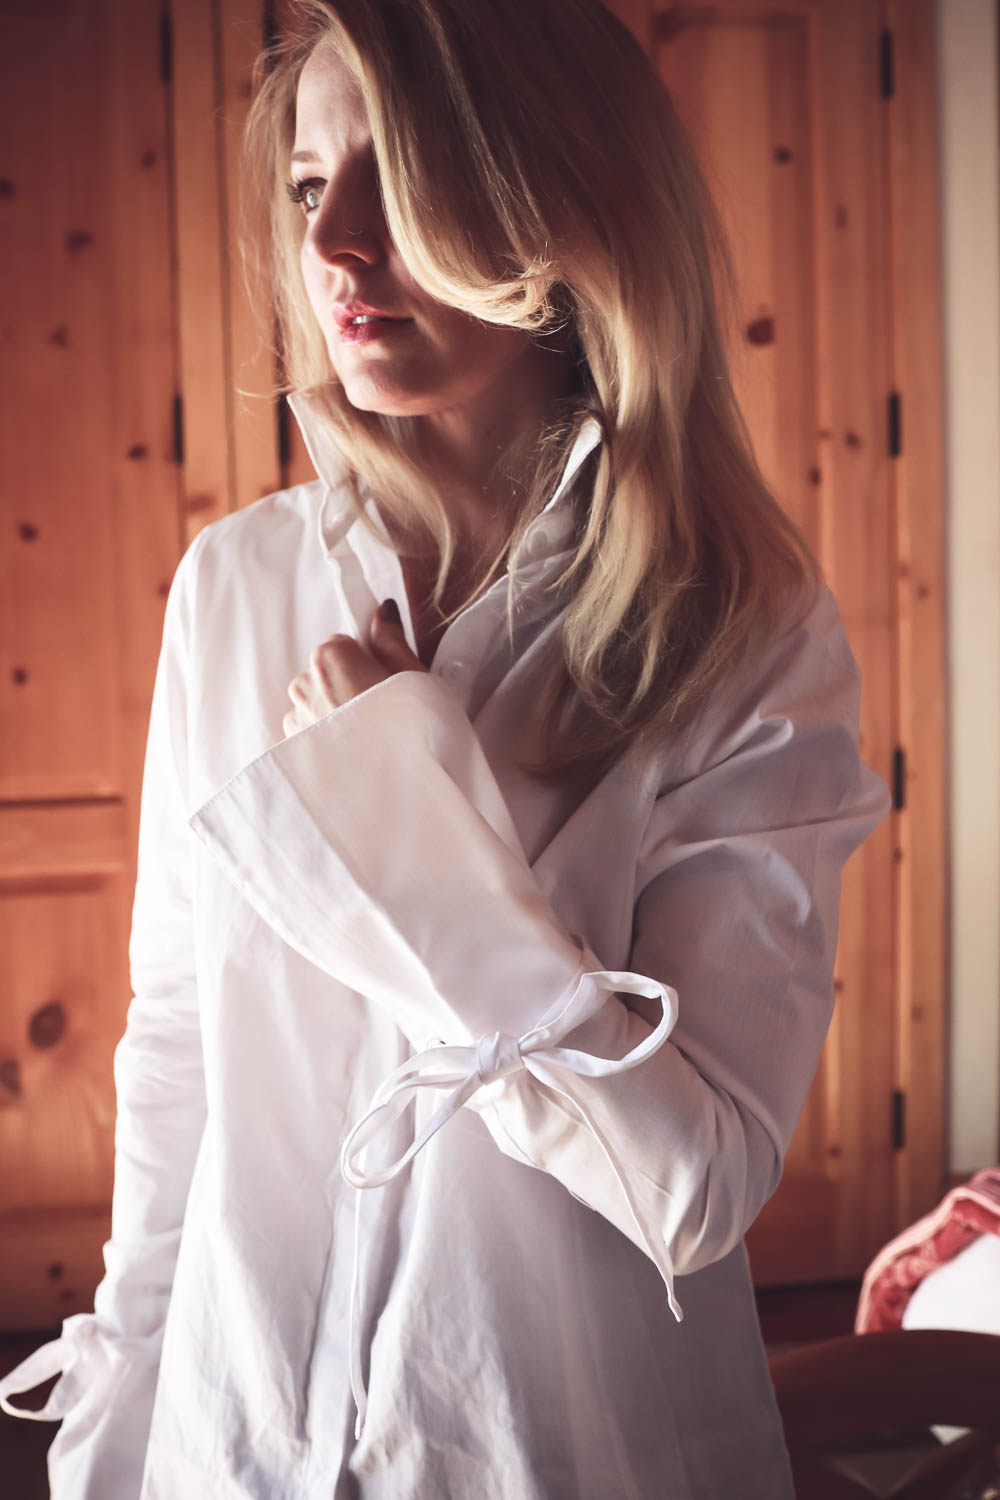 Laceup top by MLM in white button down poplin worn by Erin Busbee, fashion blogger and youtuber based in San Antonio, Texas. The laceup detail is a big fashion trend right now. Look for laceup pumps, flats, jeans, pants, tops, sweaters and jackets!